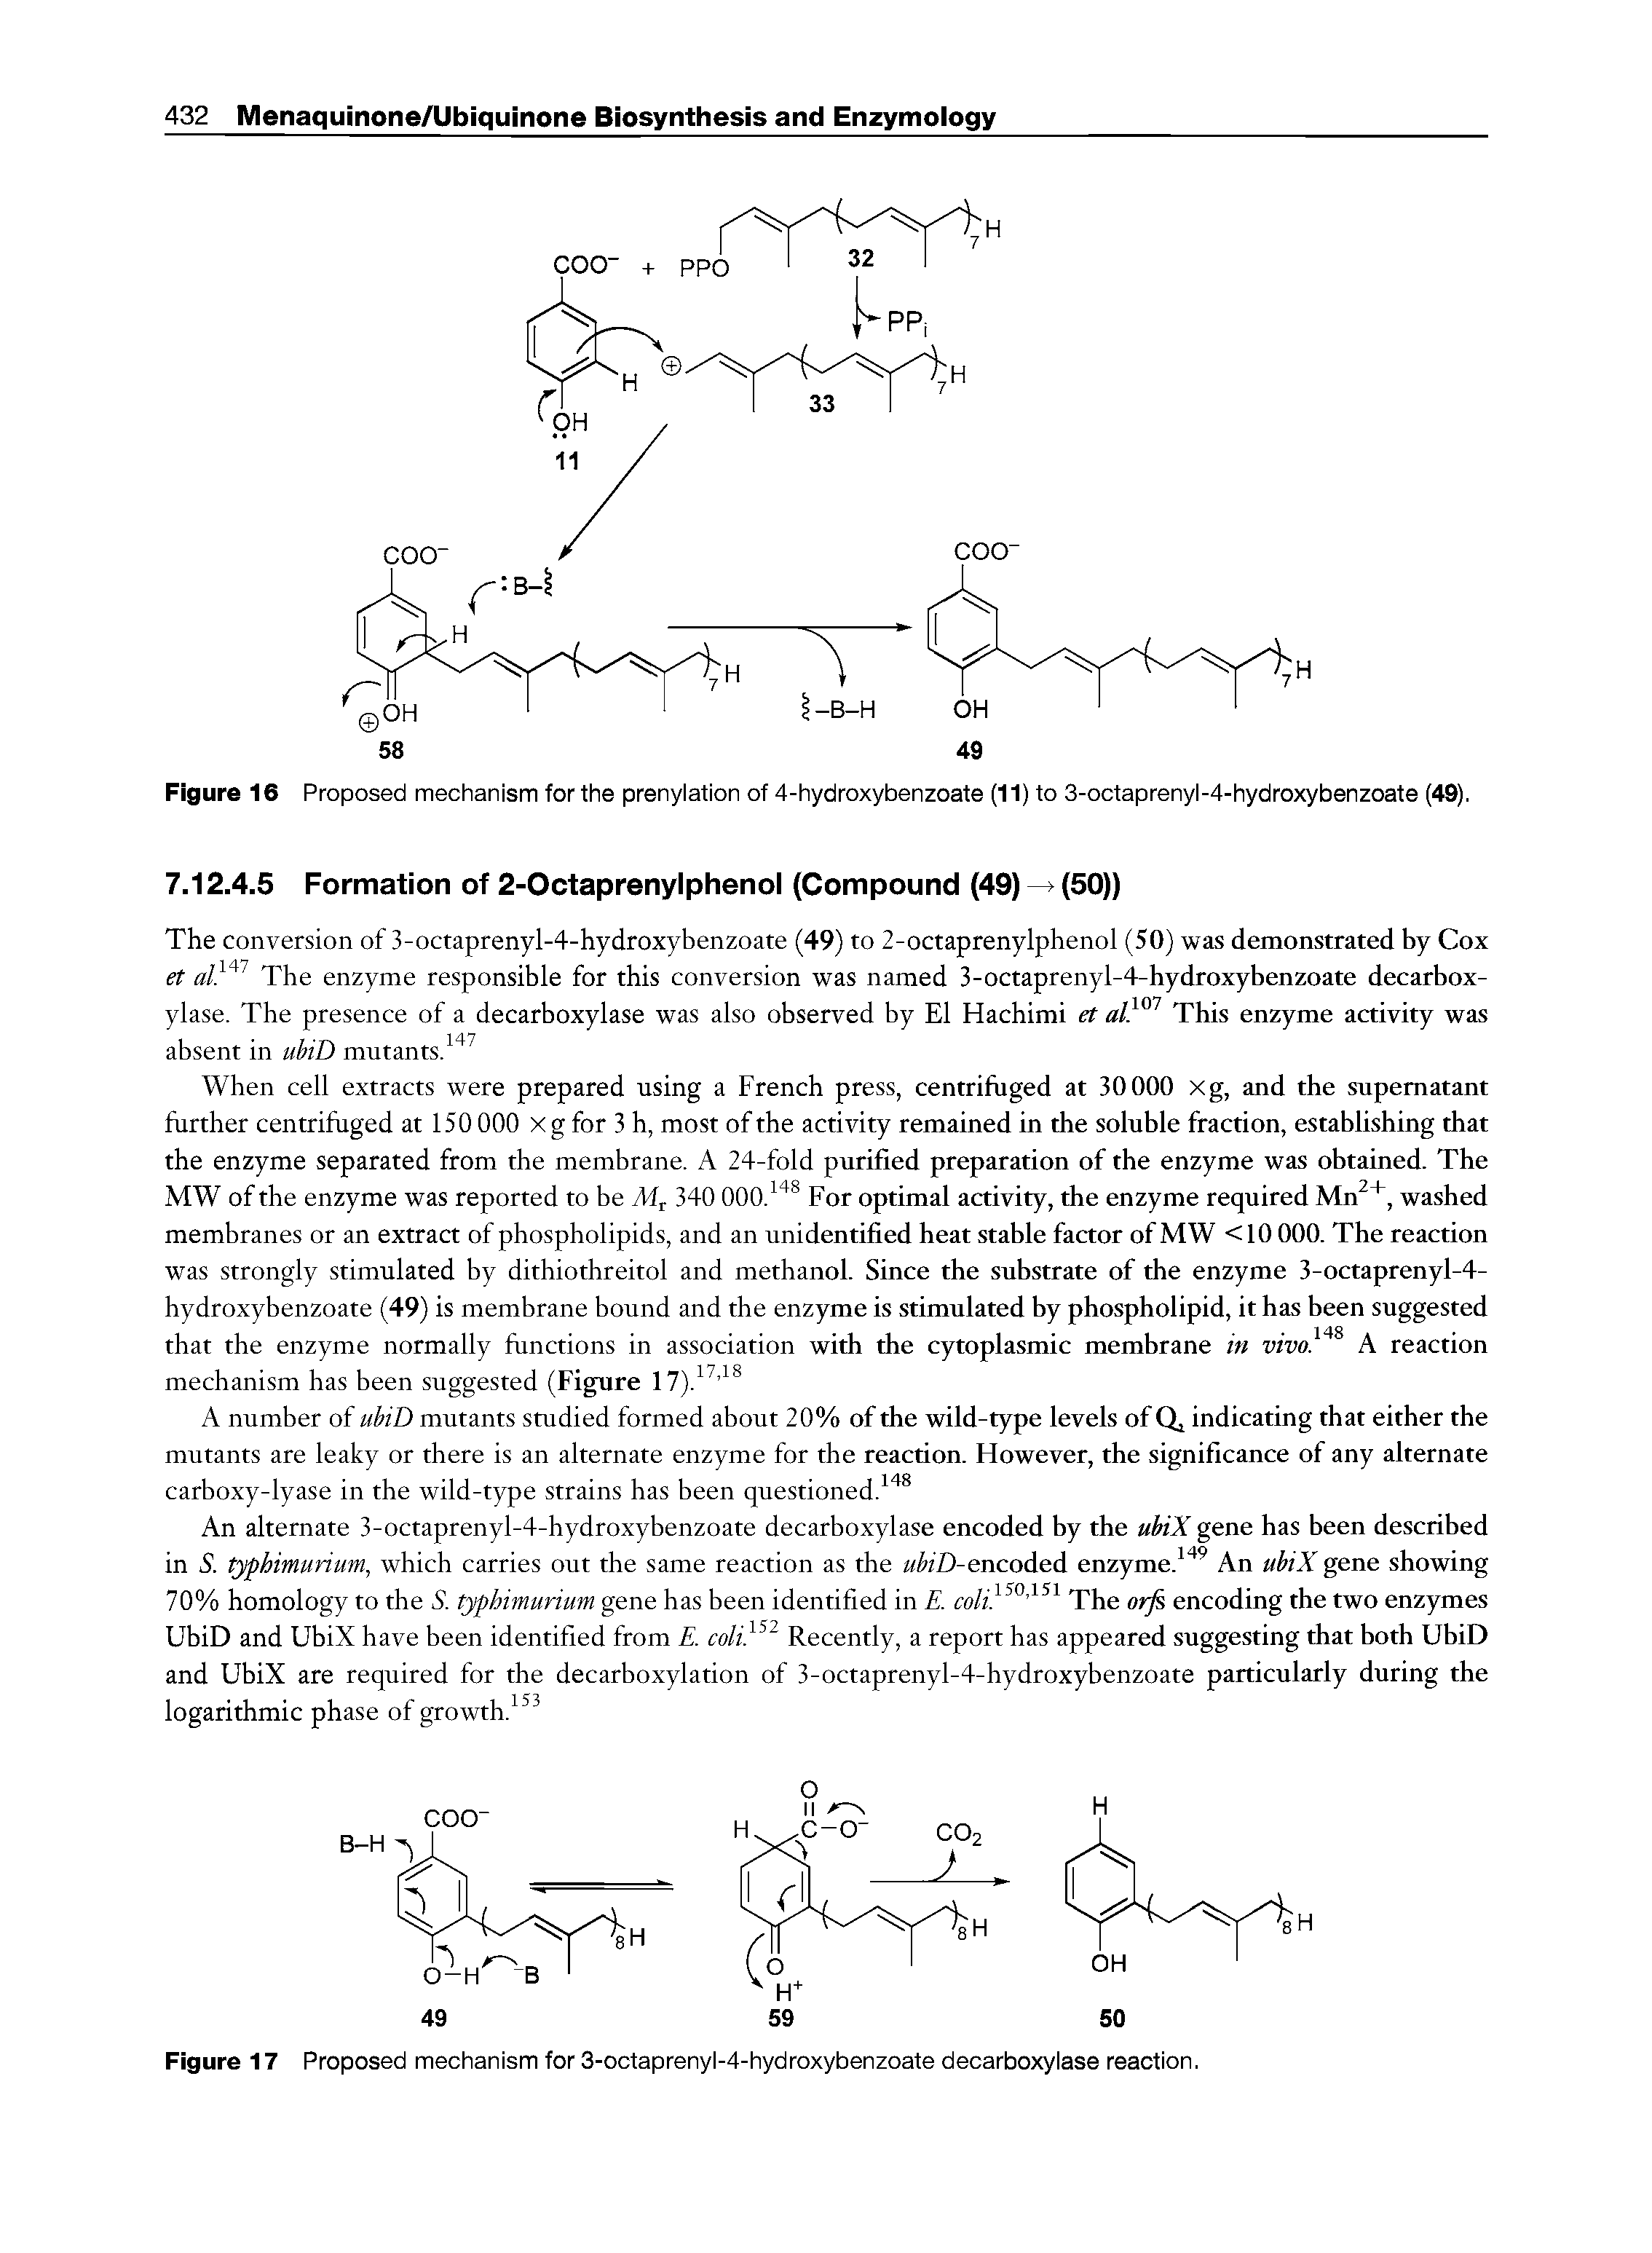 Figure 17 Proposed mechanism for 3-octaprenyl-4-hydroxybenzoate decarboxylase reaction.